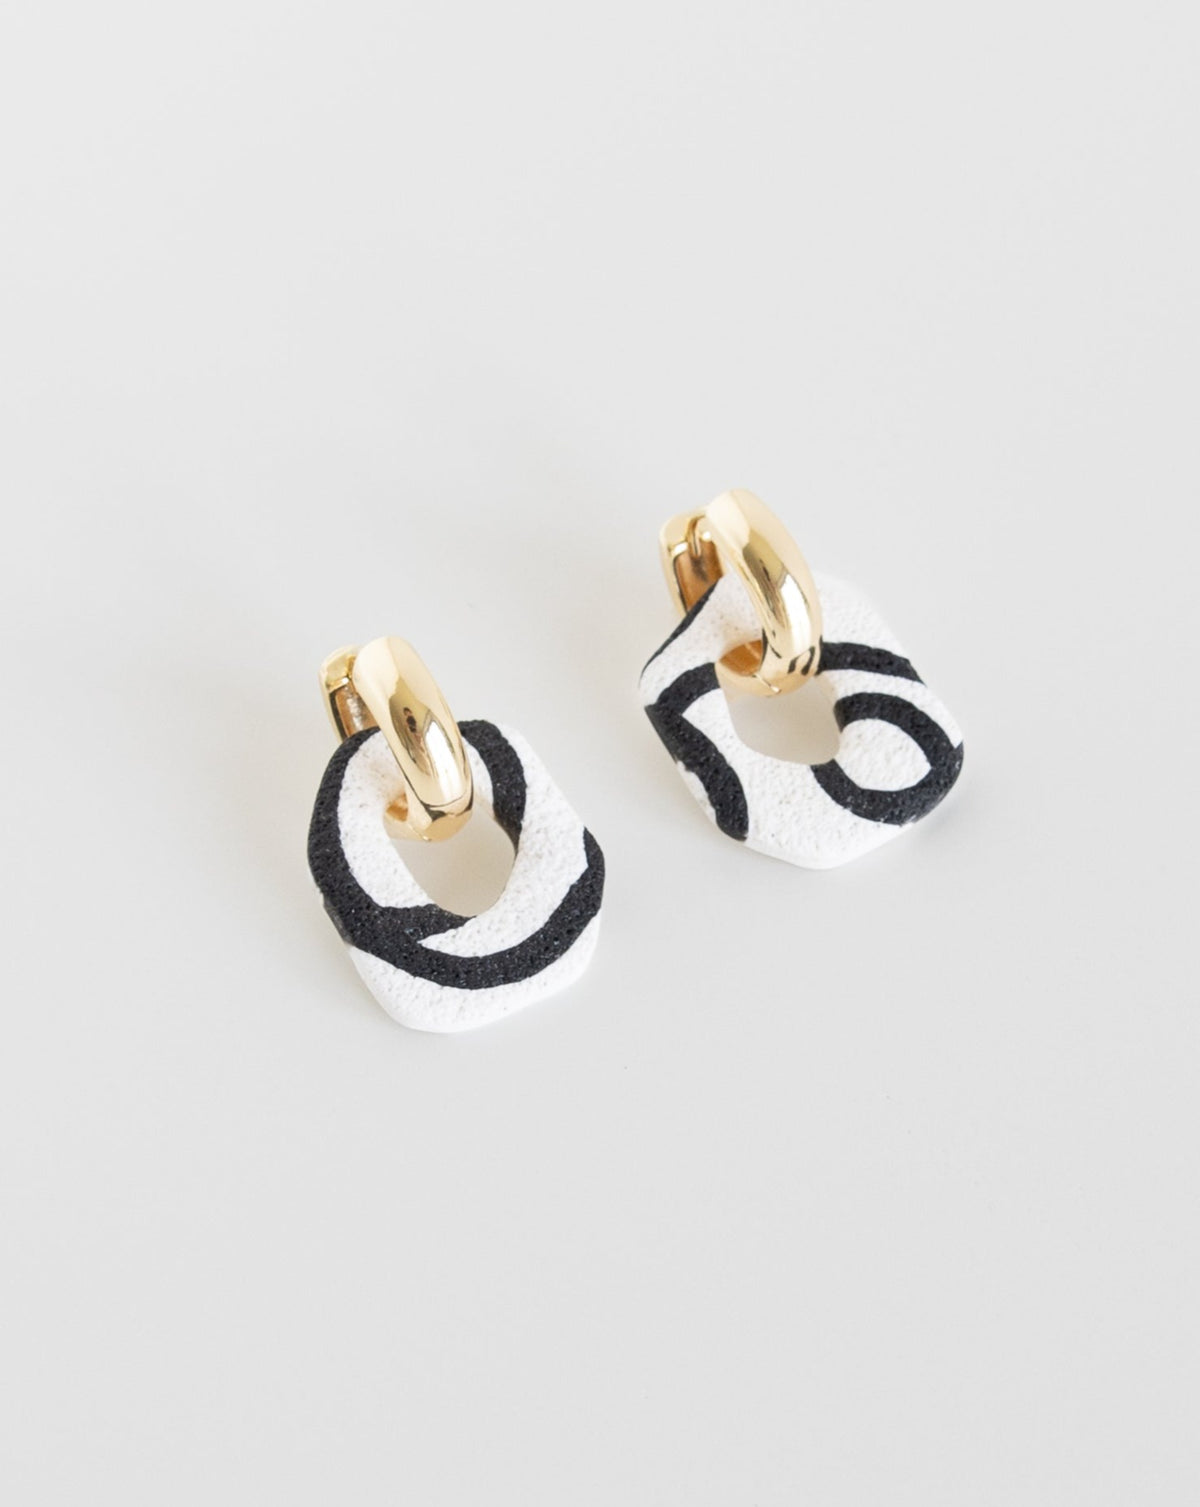 Darien earrings in Abstract White color with gold hoops, side view